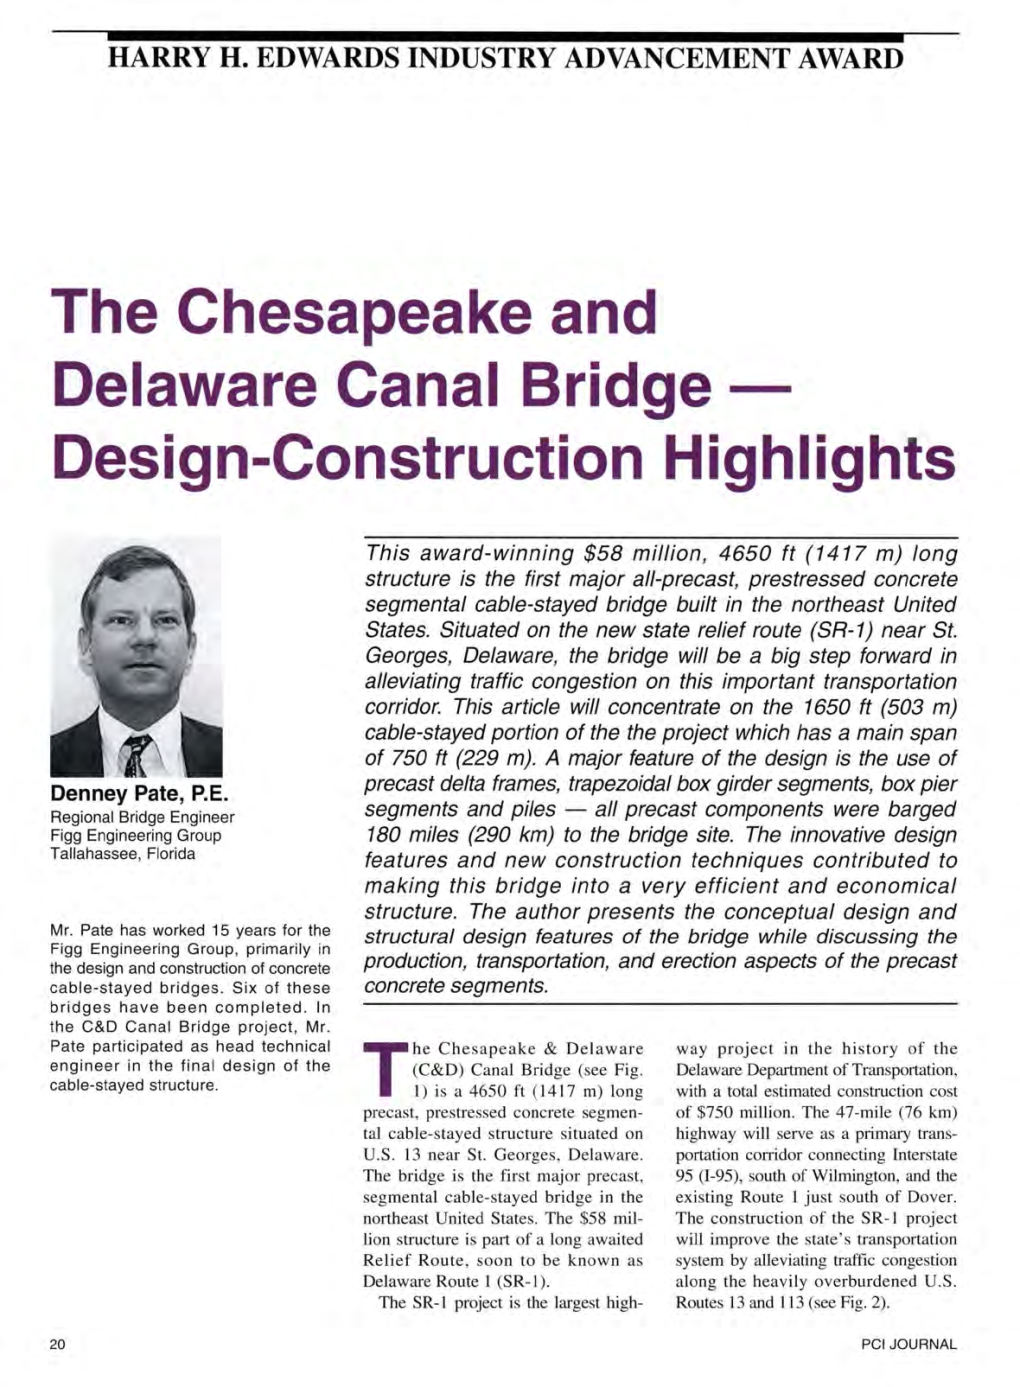 The Chesapeake and Delaware Canal Bridge Design-Construction Highlights